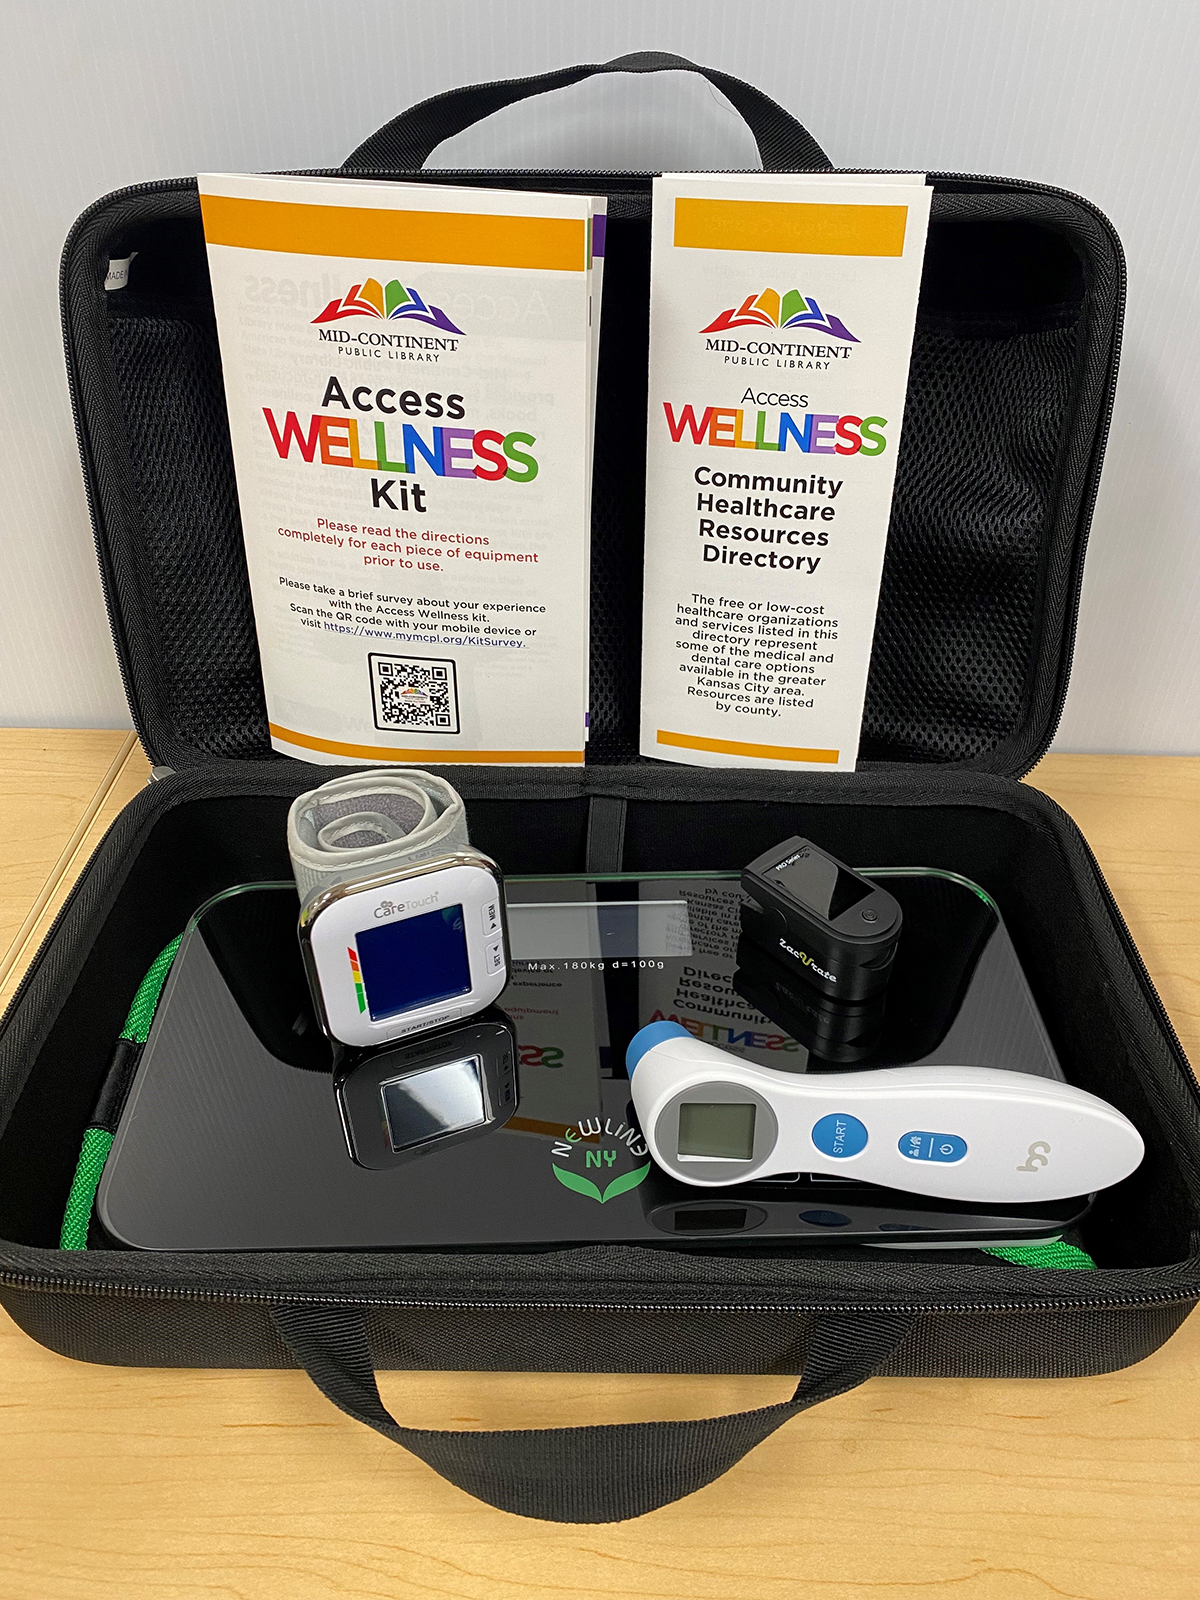 MCPL Launches Access Wellness, Lends Kits